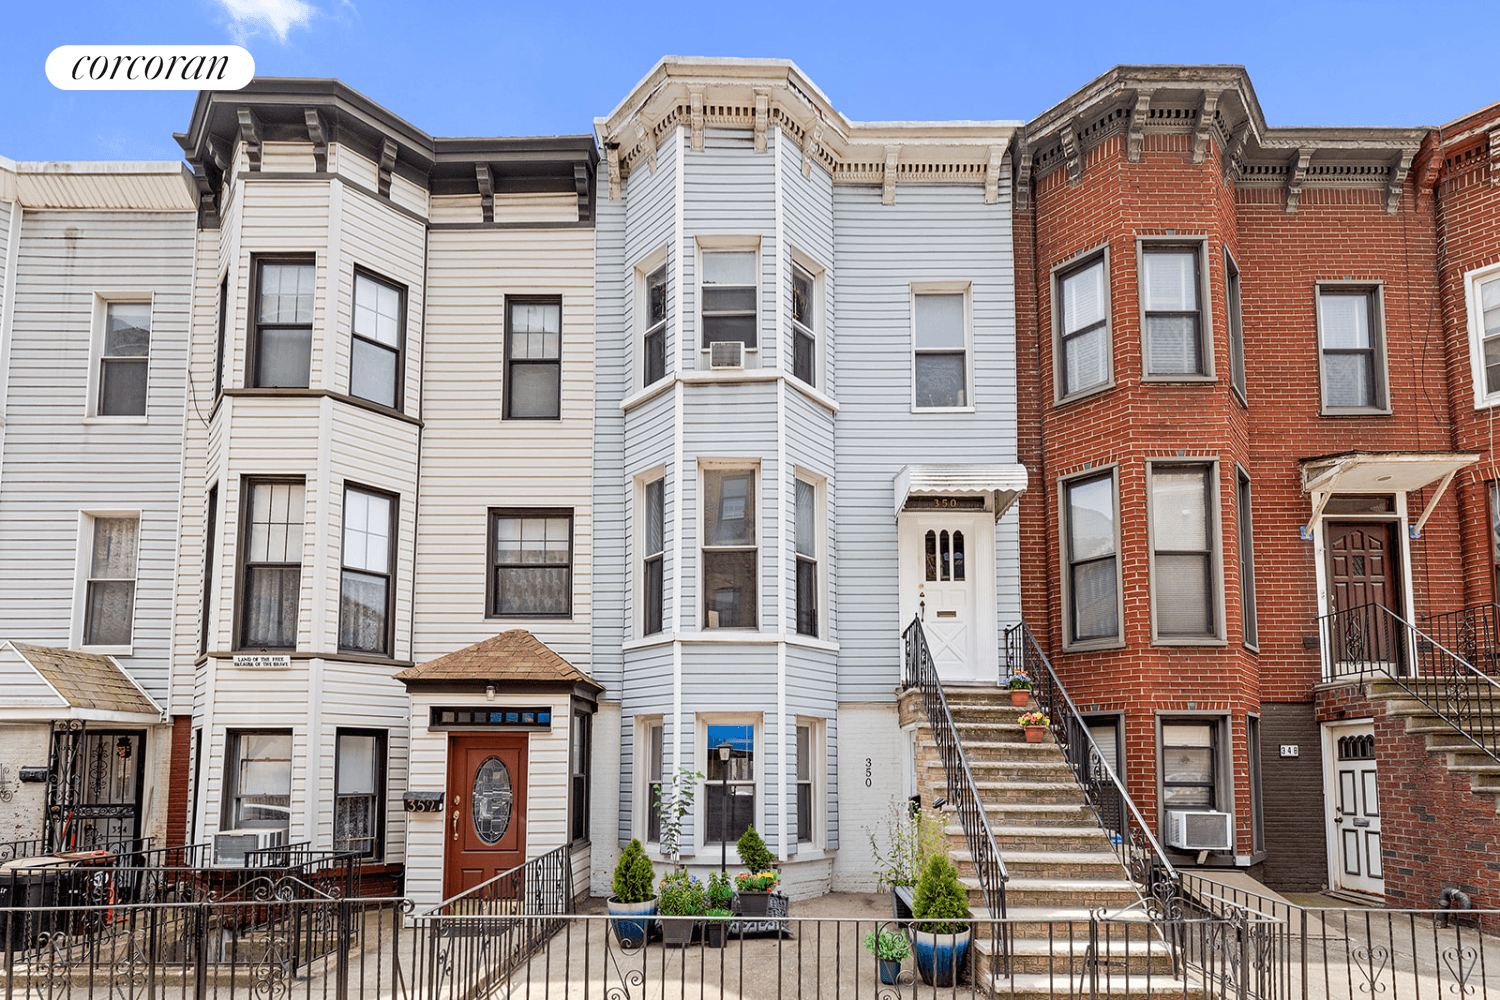 Introducing 350 74th Street, a beautifully renovated 5 bed 3bath two family home located in prime Bay Ridge !